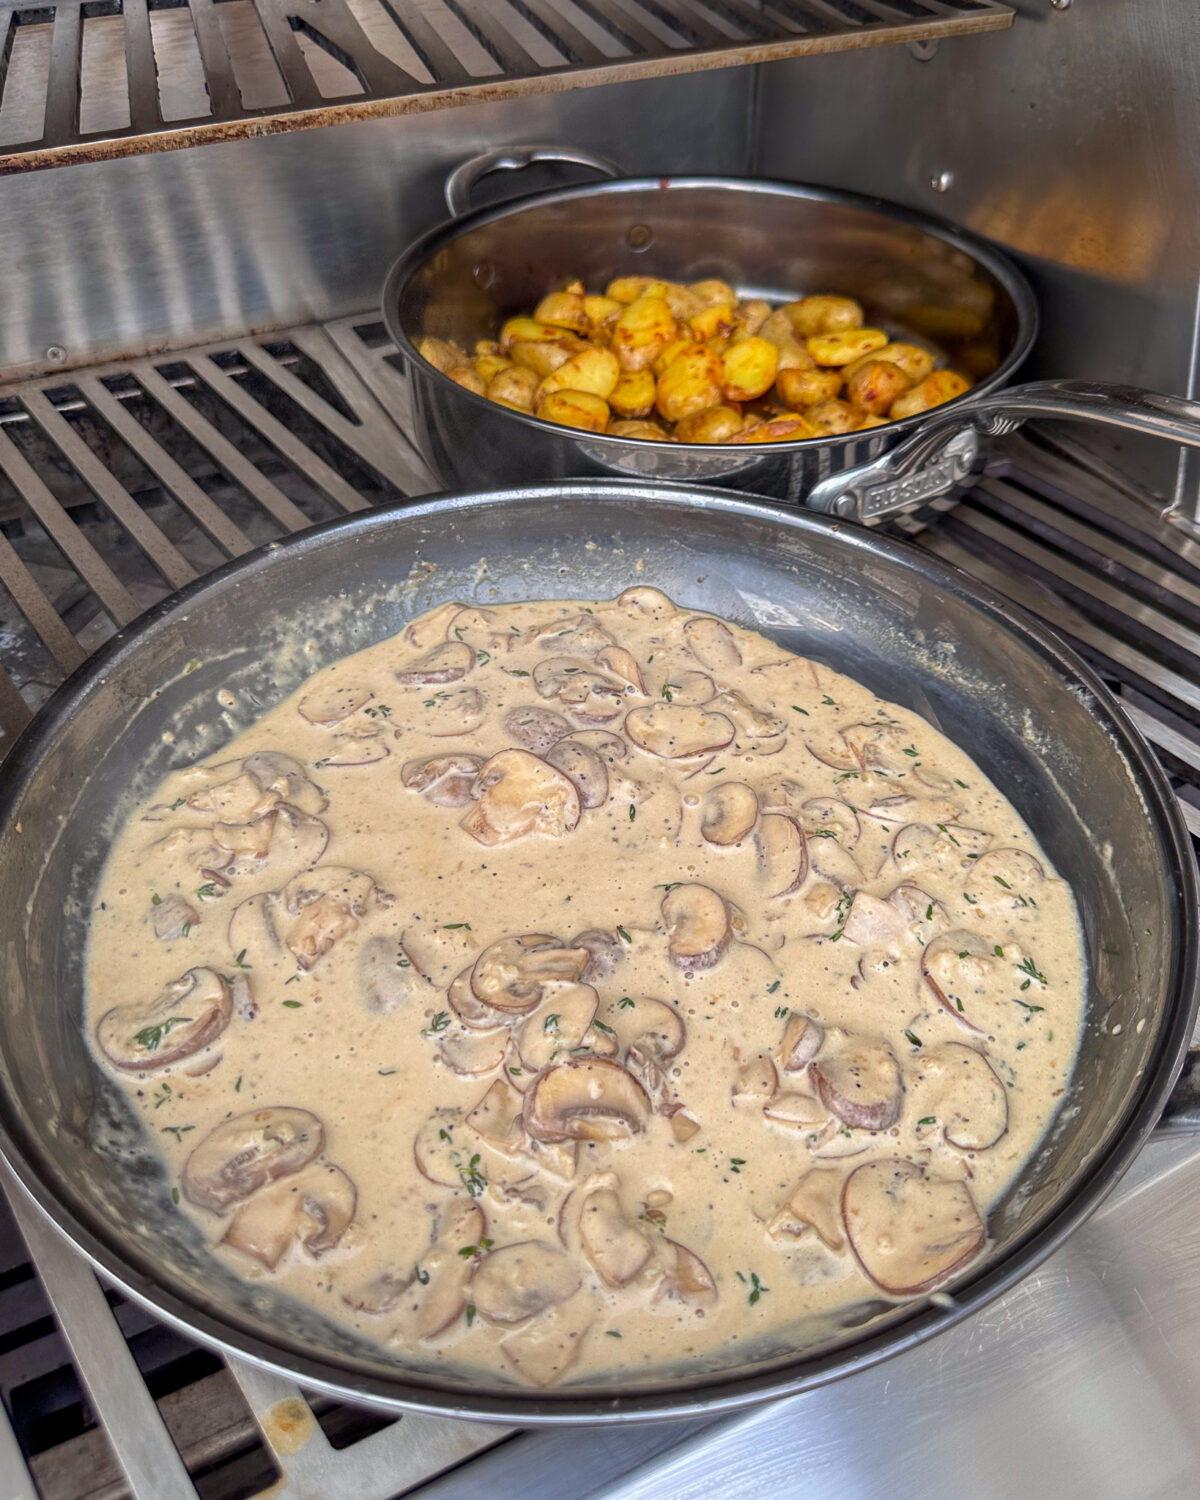 Two skillets on a grill, one with a mascarpone mushroom sauce and the other with bomba potatoes.